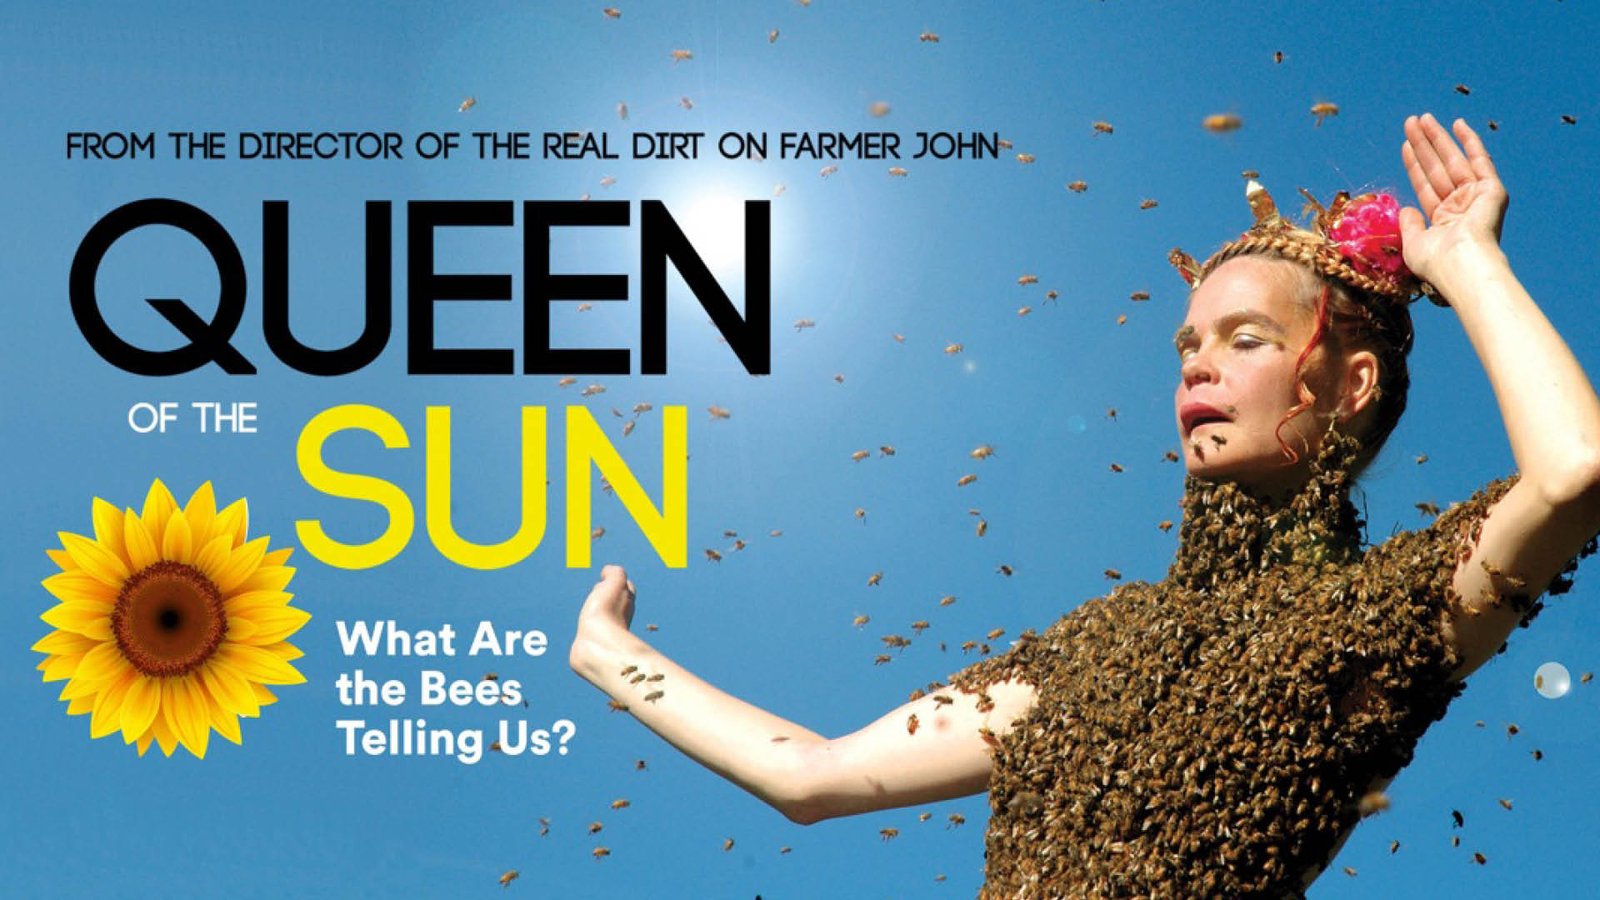 Queen of the Sun - What are the Bees Telling Us?